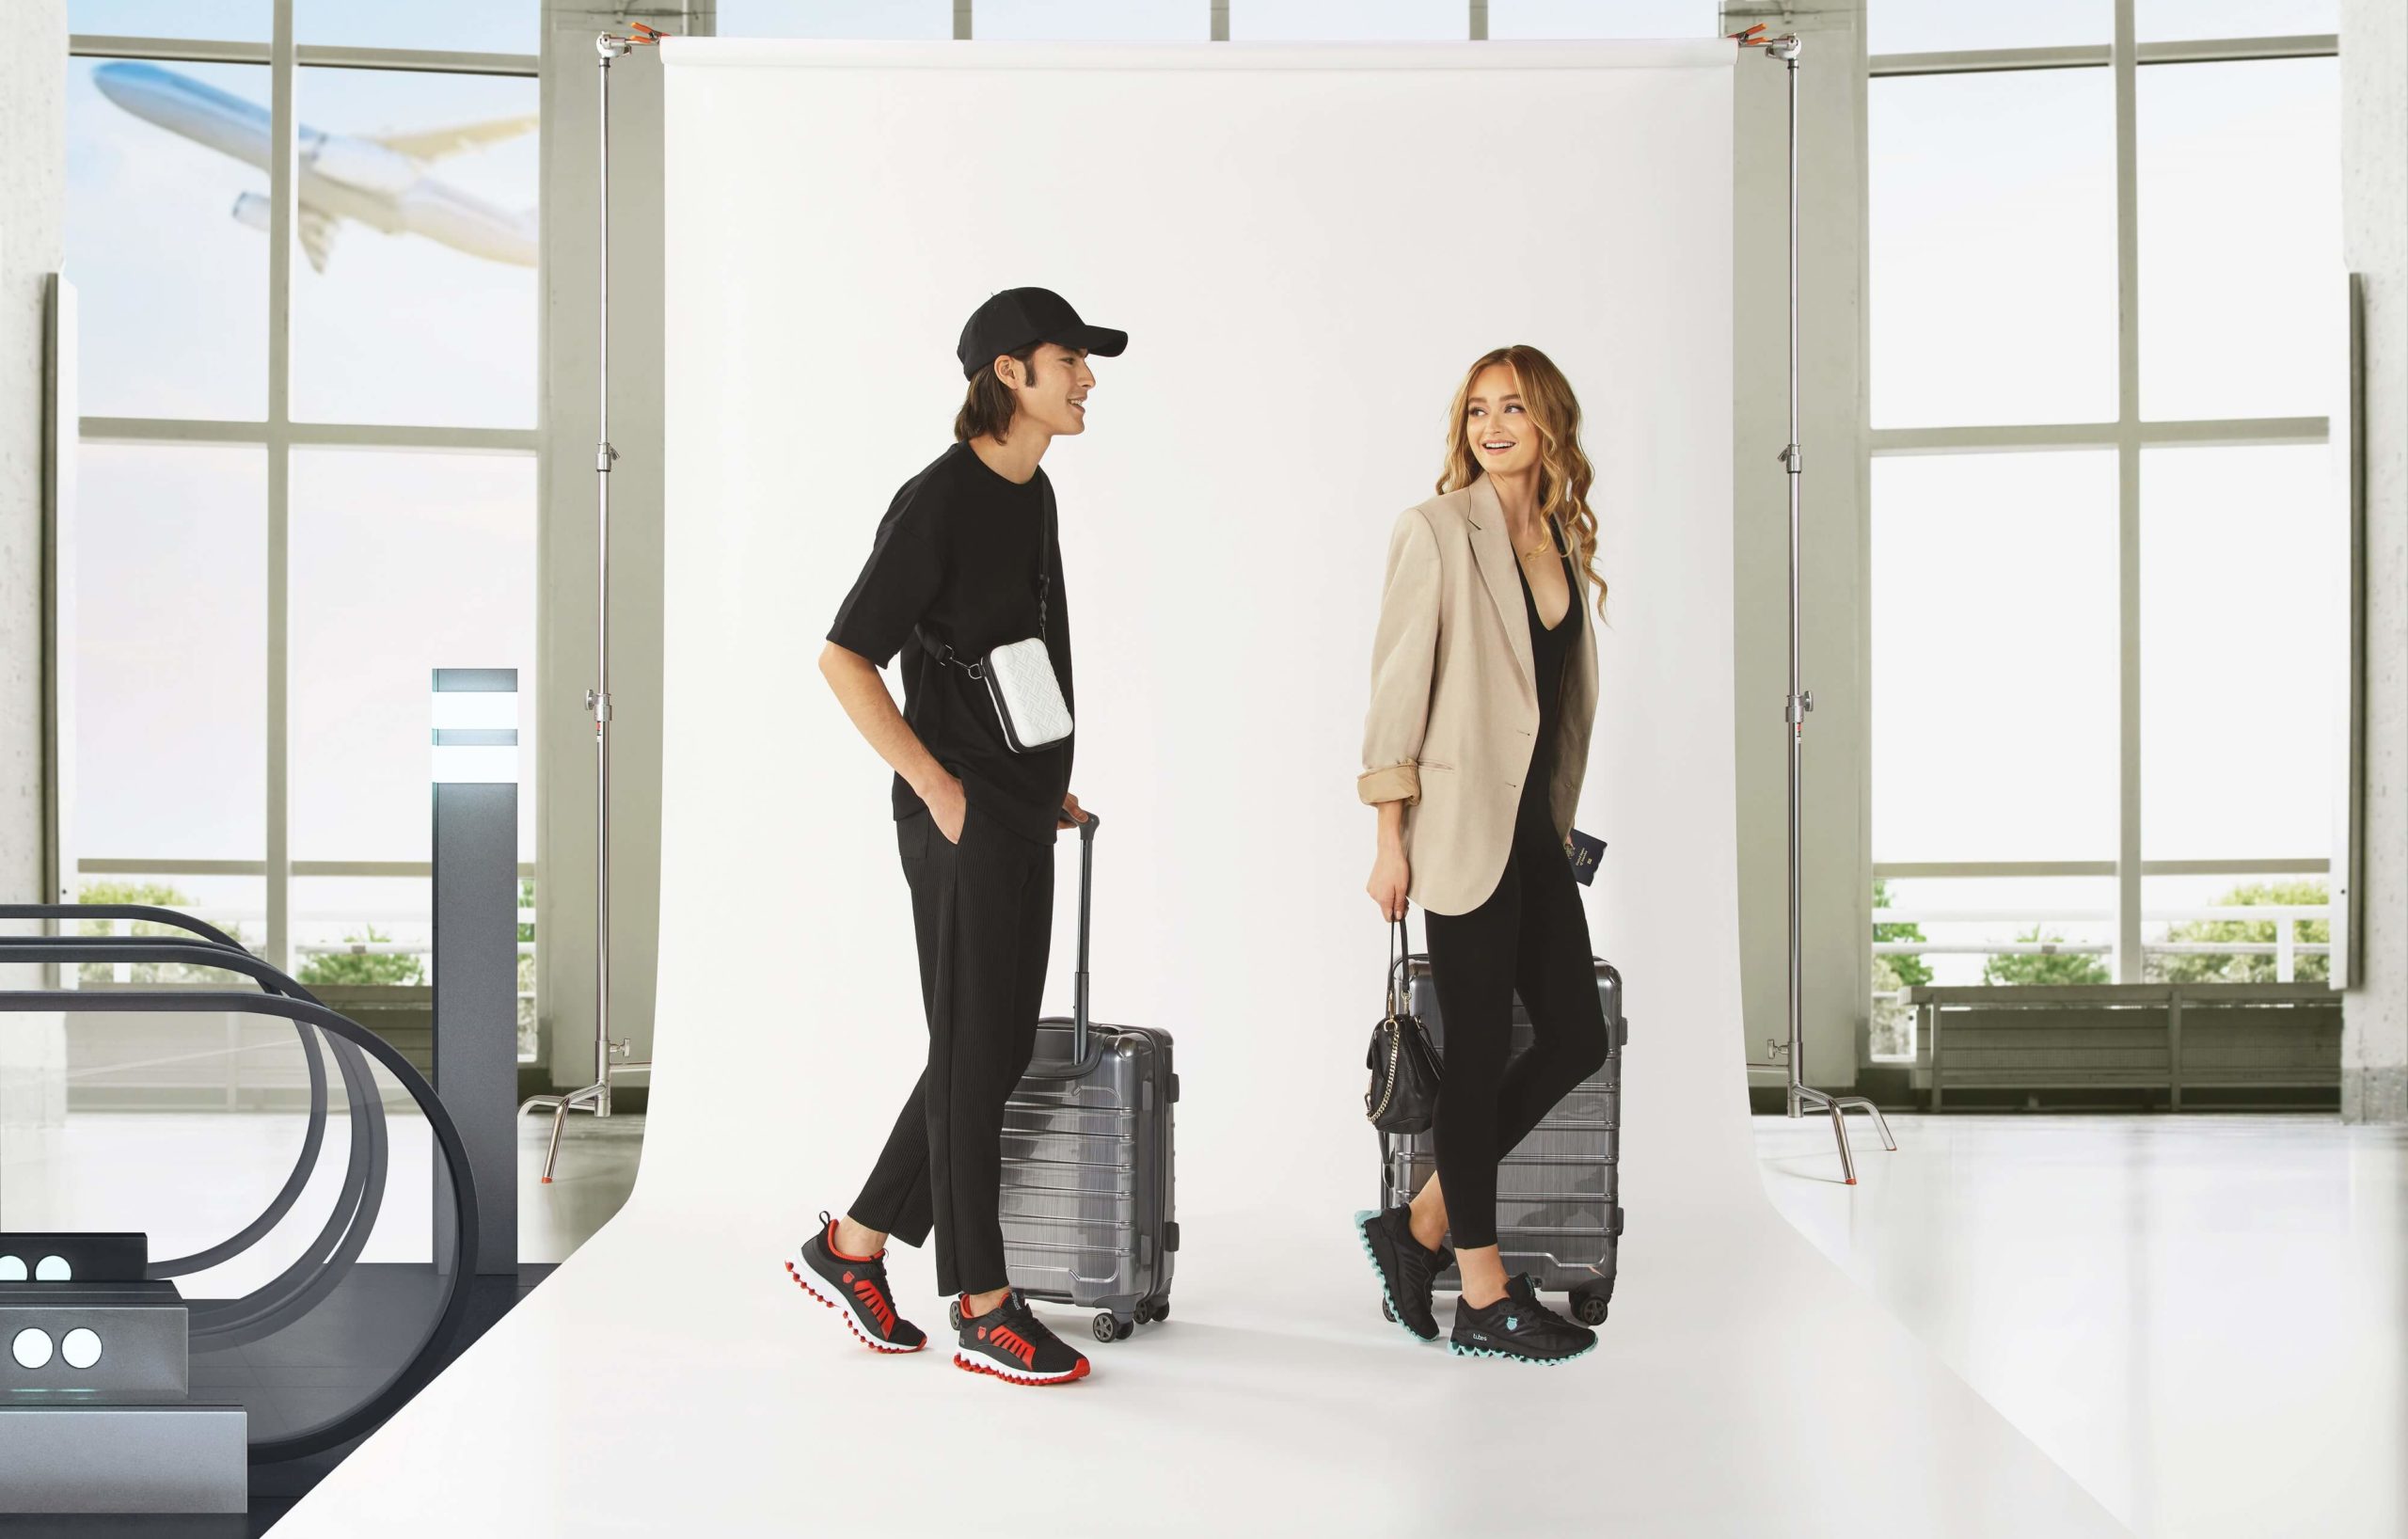 A male and female models in an airport backdrop carrying travel suitcases